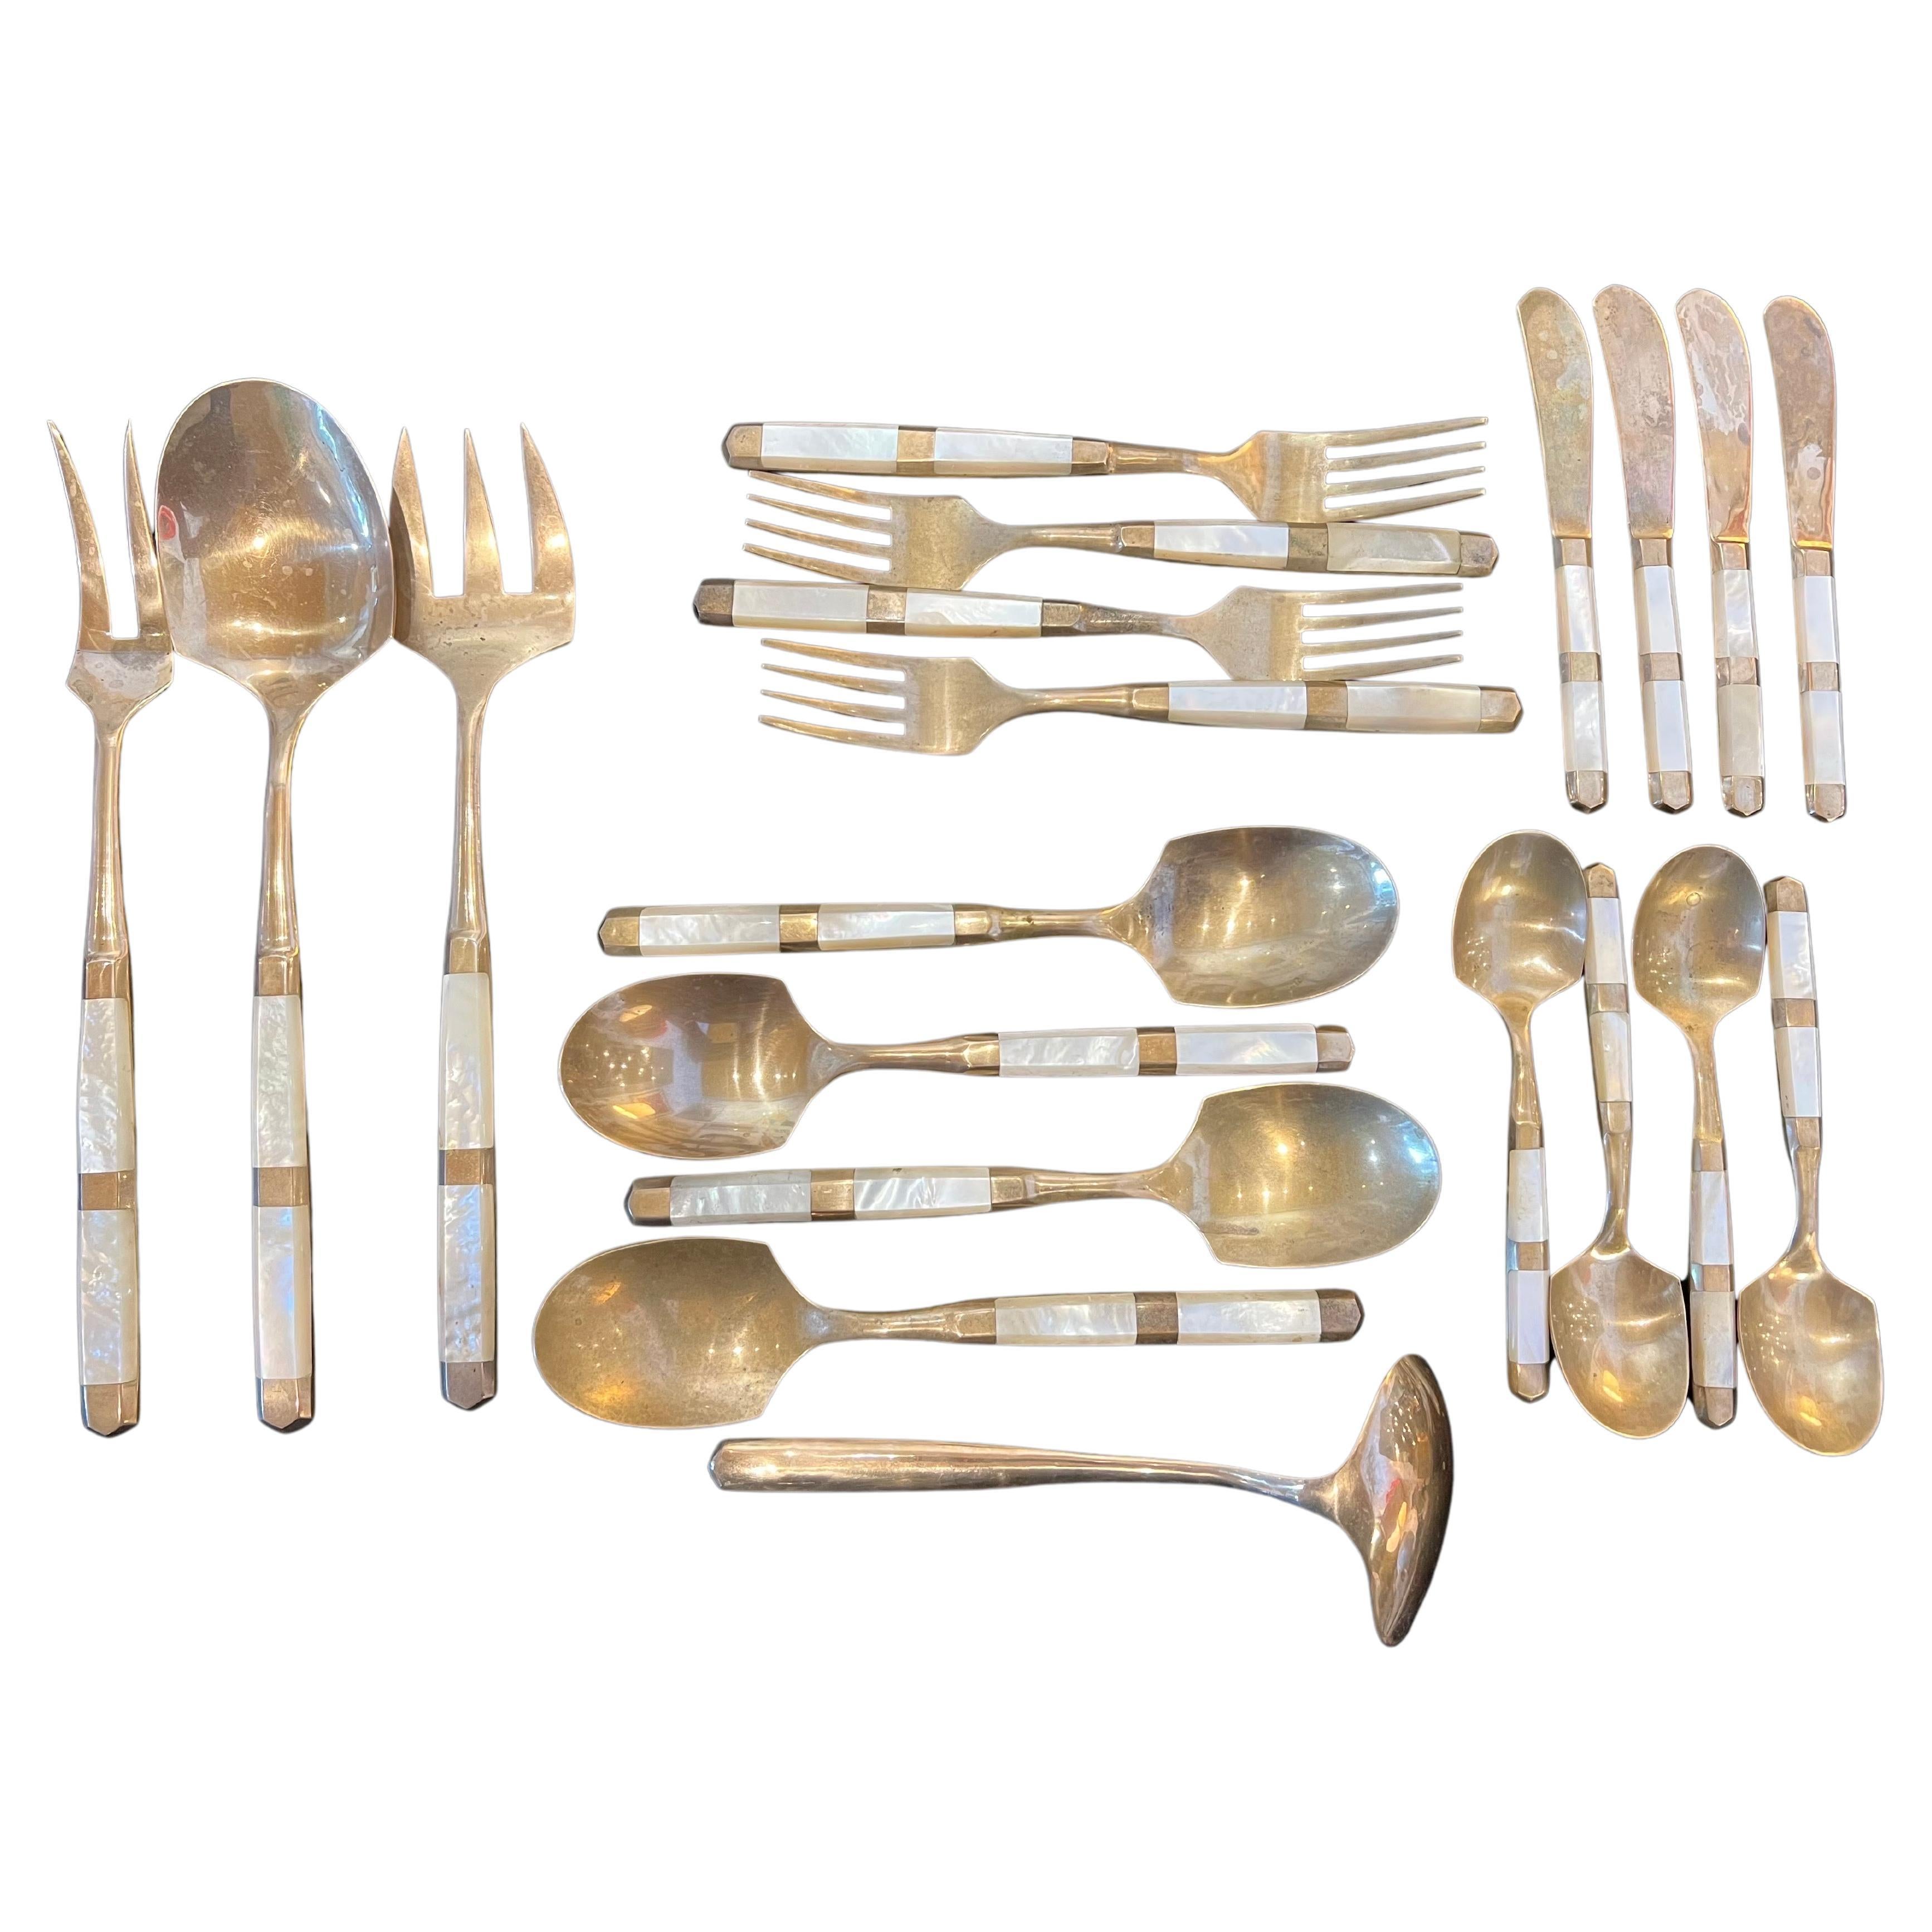 Beautiful Elegant set for 4 brass & mother of pearl hand-made flatware dinner set, 4 soup spoons 4 dinner forks 4 dessert spoons, 4 butter knives, and salad servers with spoon ladle.